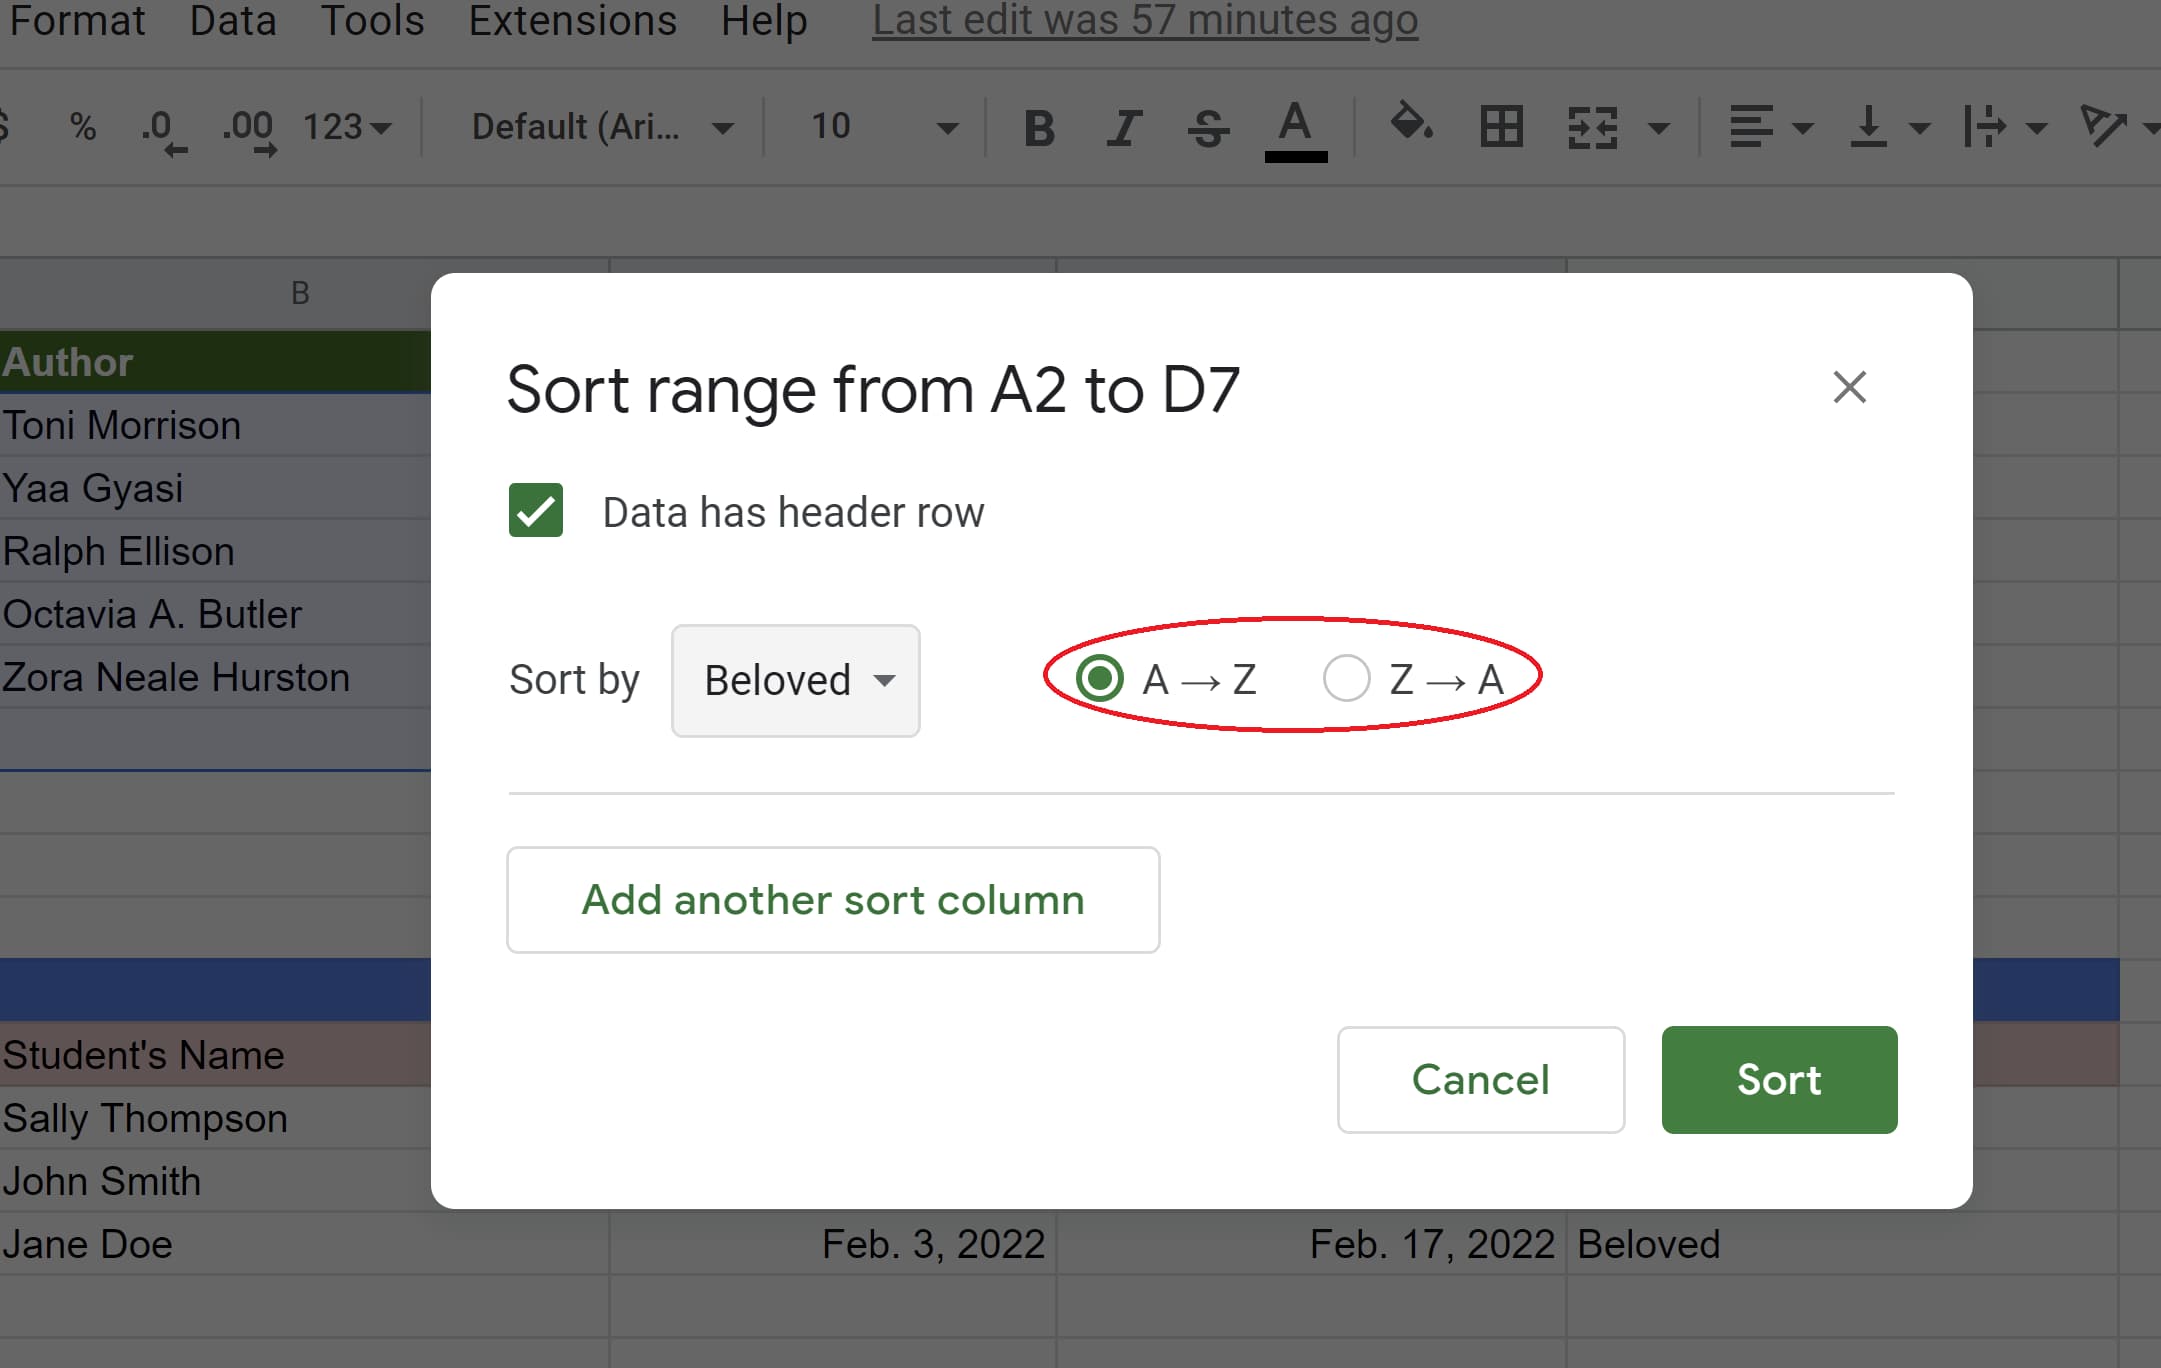 The selected AZ option to sort the data in ascending order in Google Spreadsheets